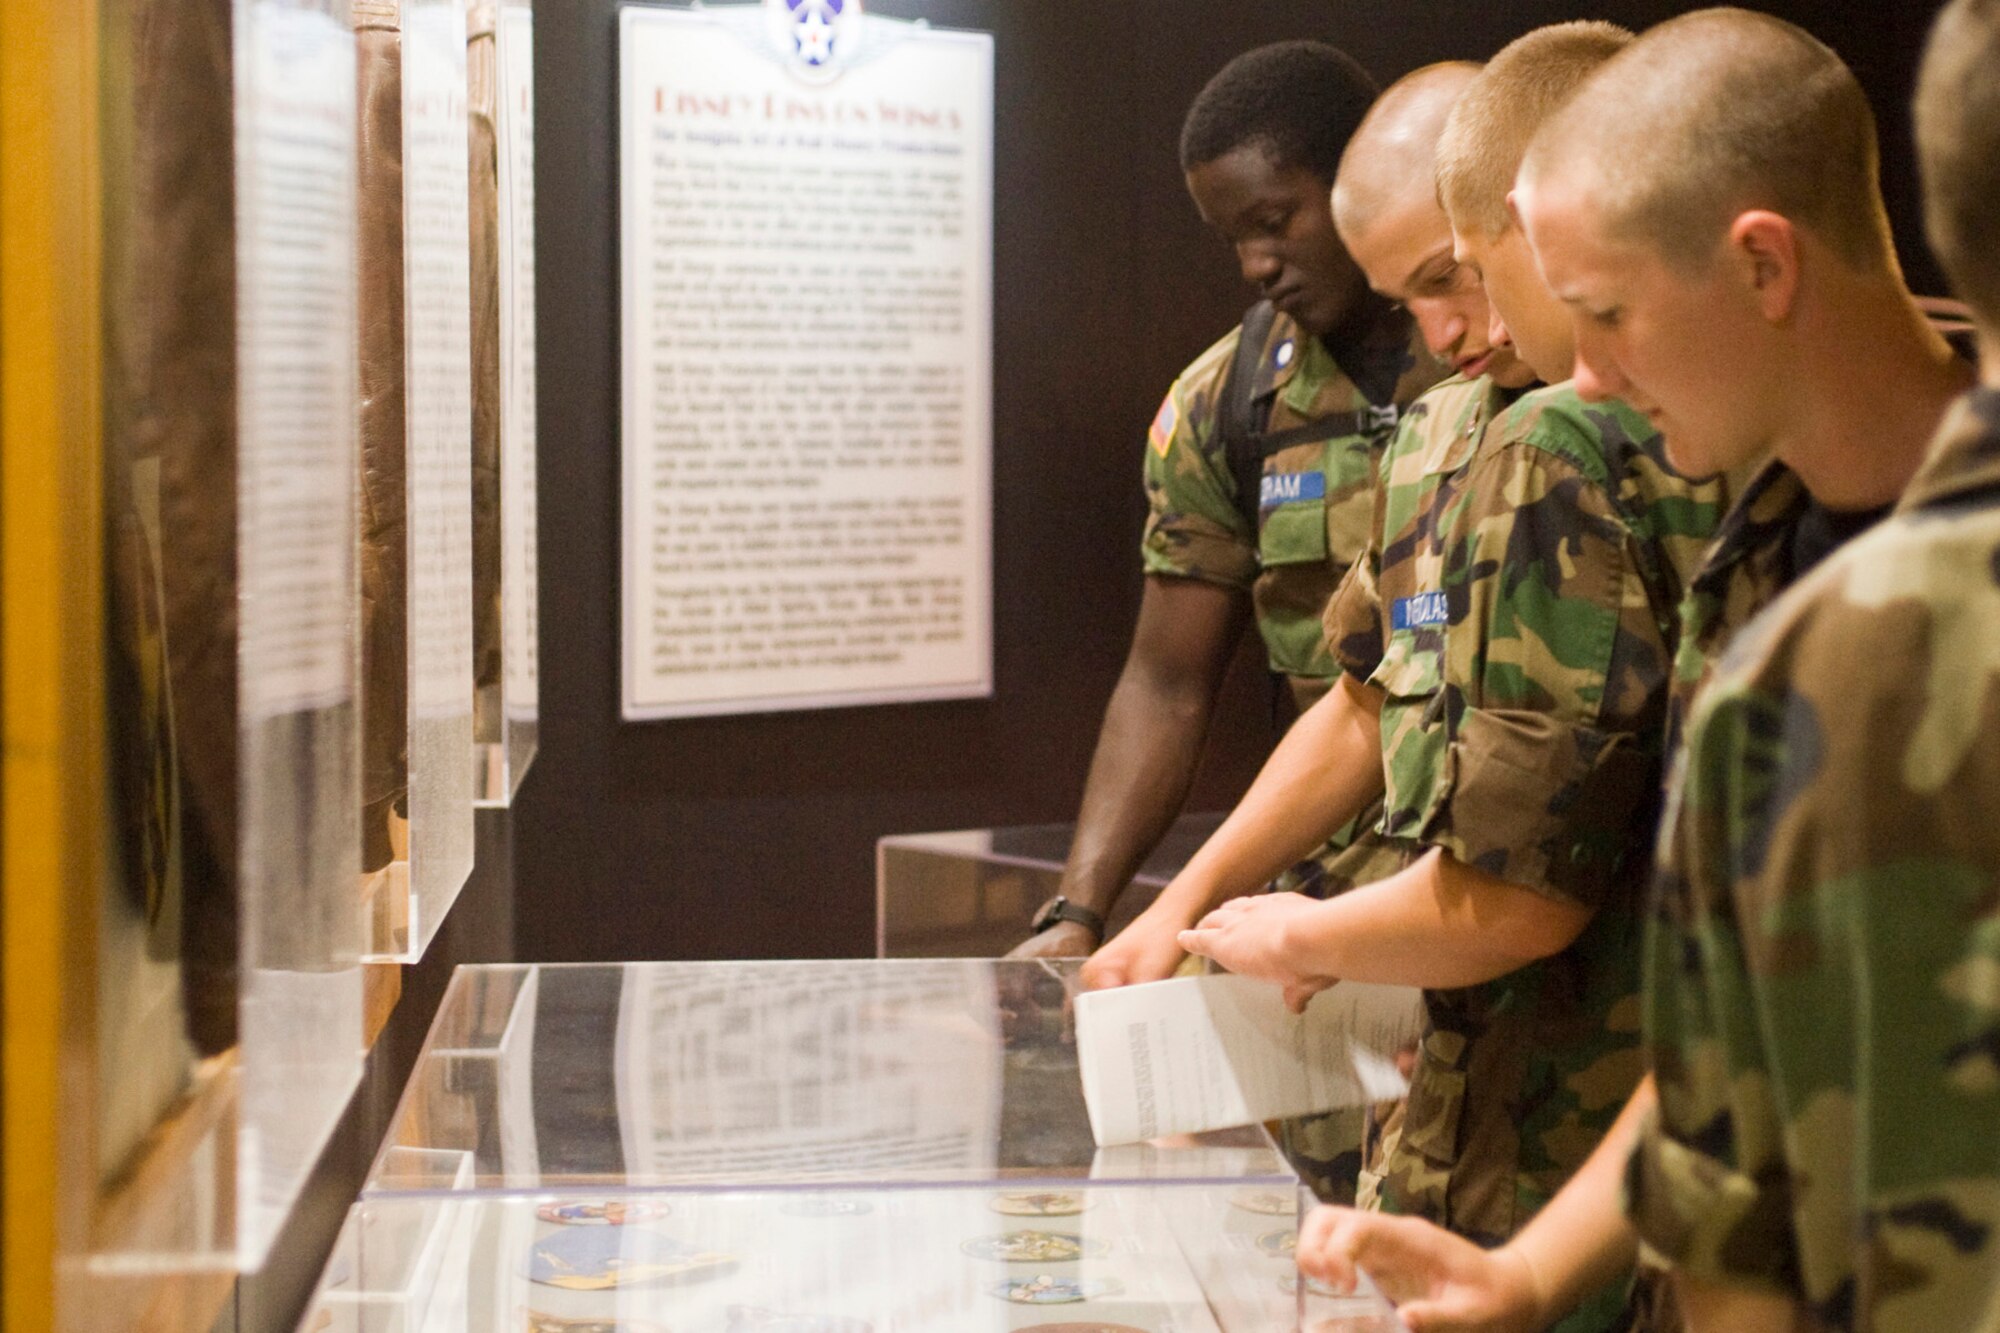 YOUNGSTOWN AIR RESERVE STATION, Ohio--A group of Civil Air Patrol (CAP) cadets look at historic Air Force unit patches while touring the National Museum of the US Air Force, Wright-Patterson Air Force Base (AFB), Ohio. Approximately 130 cadets flew to Wright-Patterson AFB Wednesday as part of a week-long CAP encampment here.